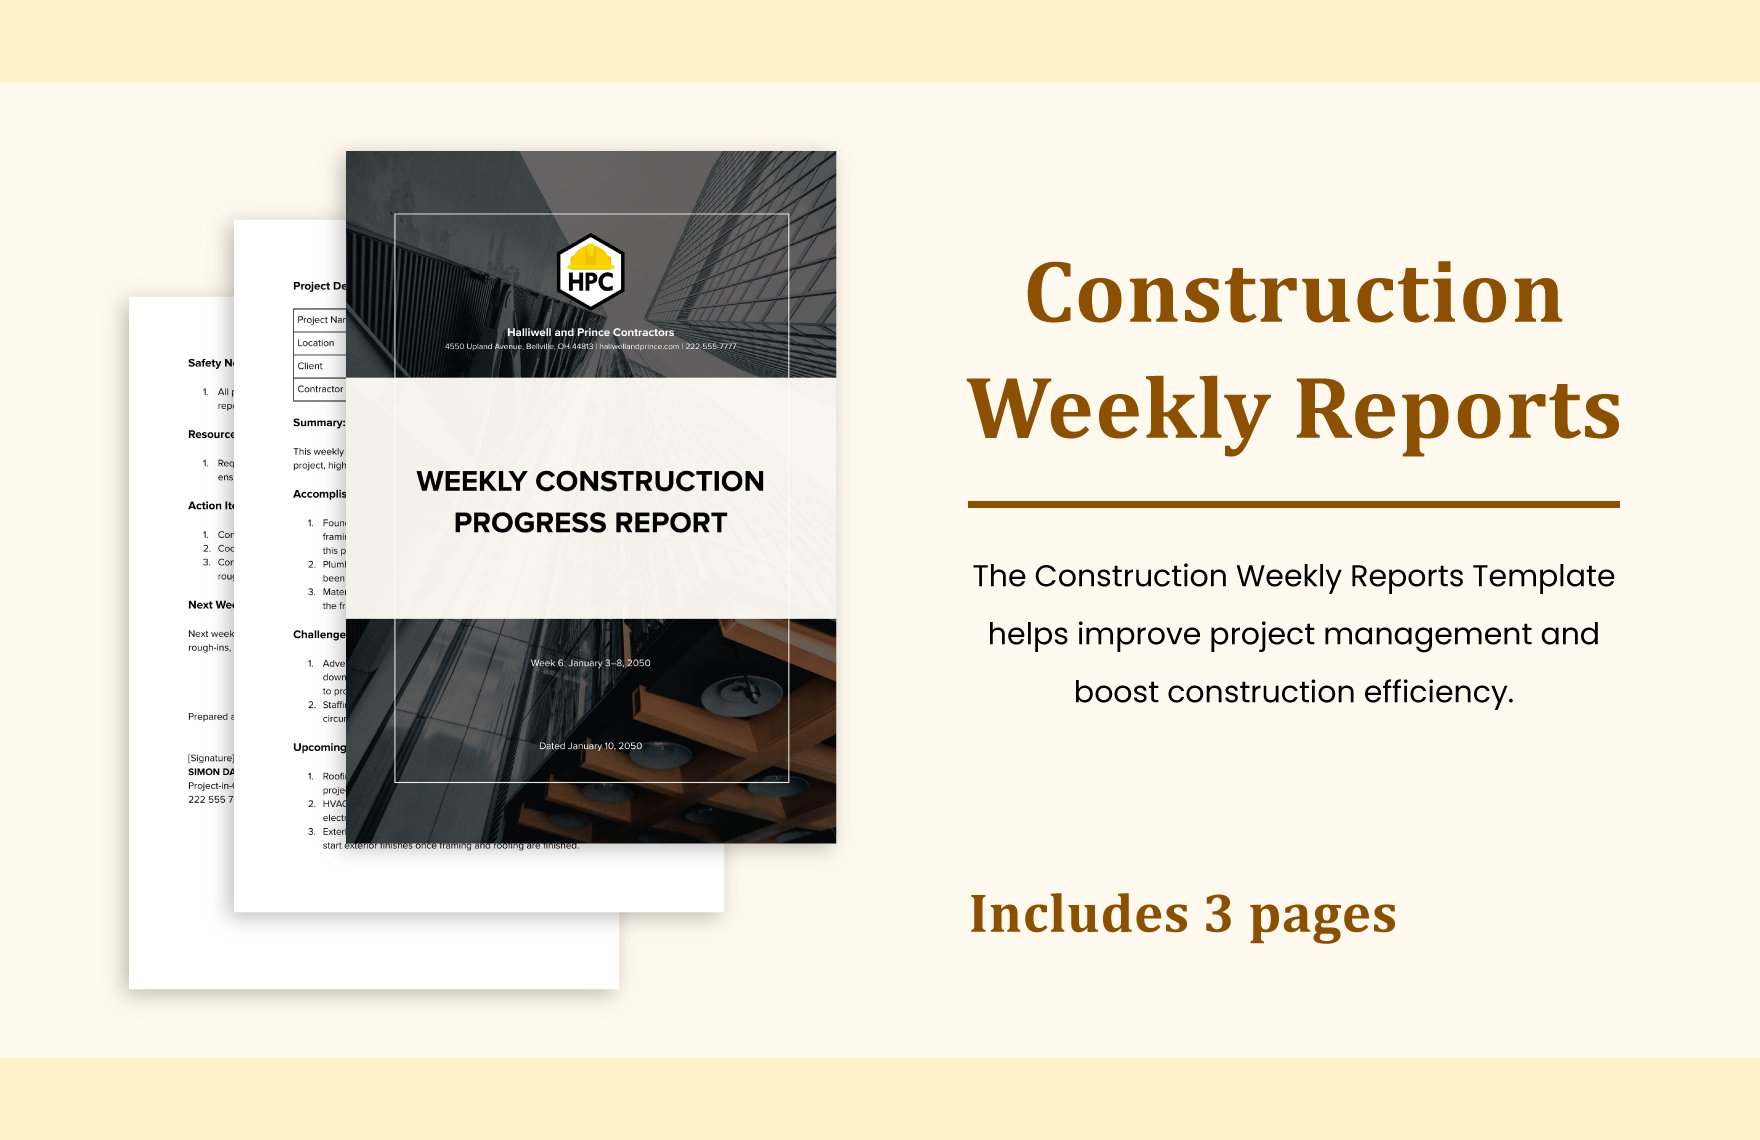 Construction Weekly Reports